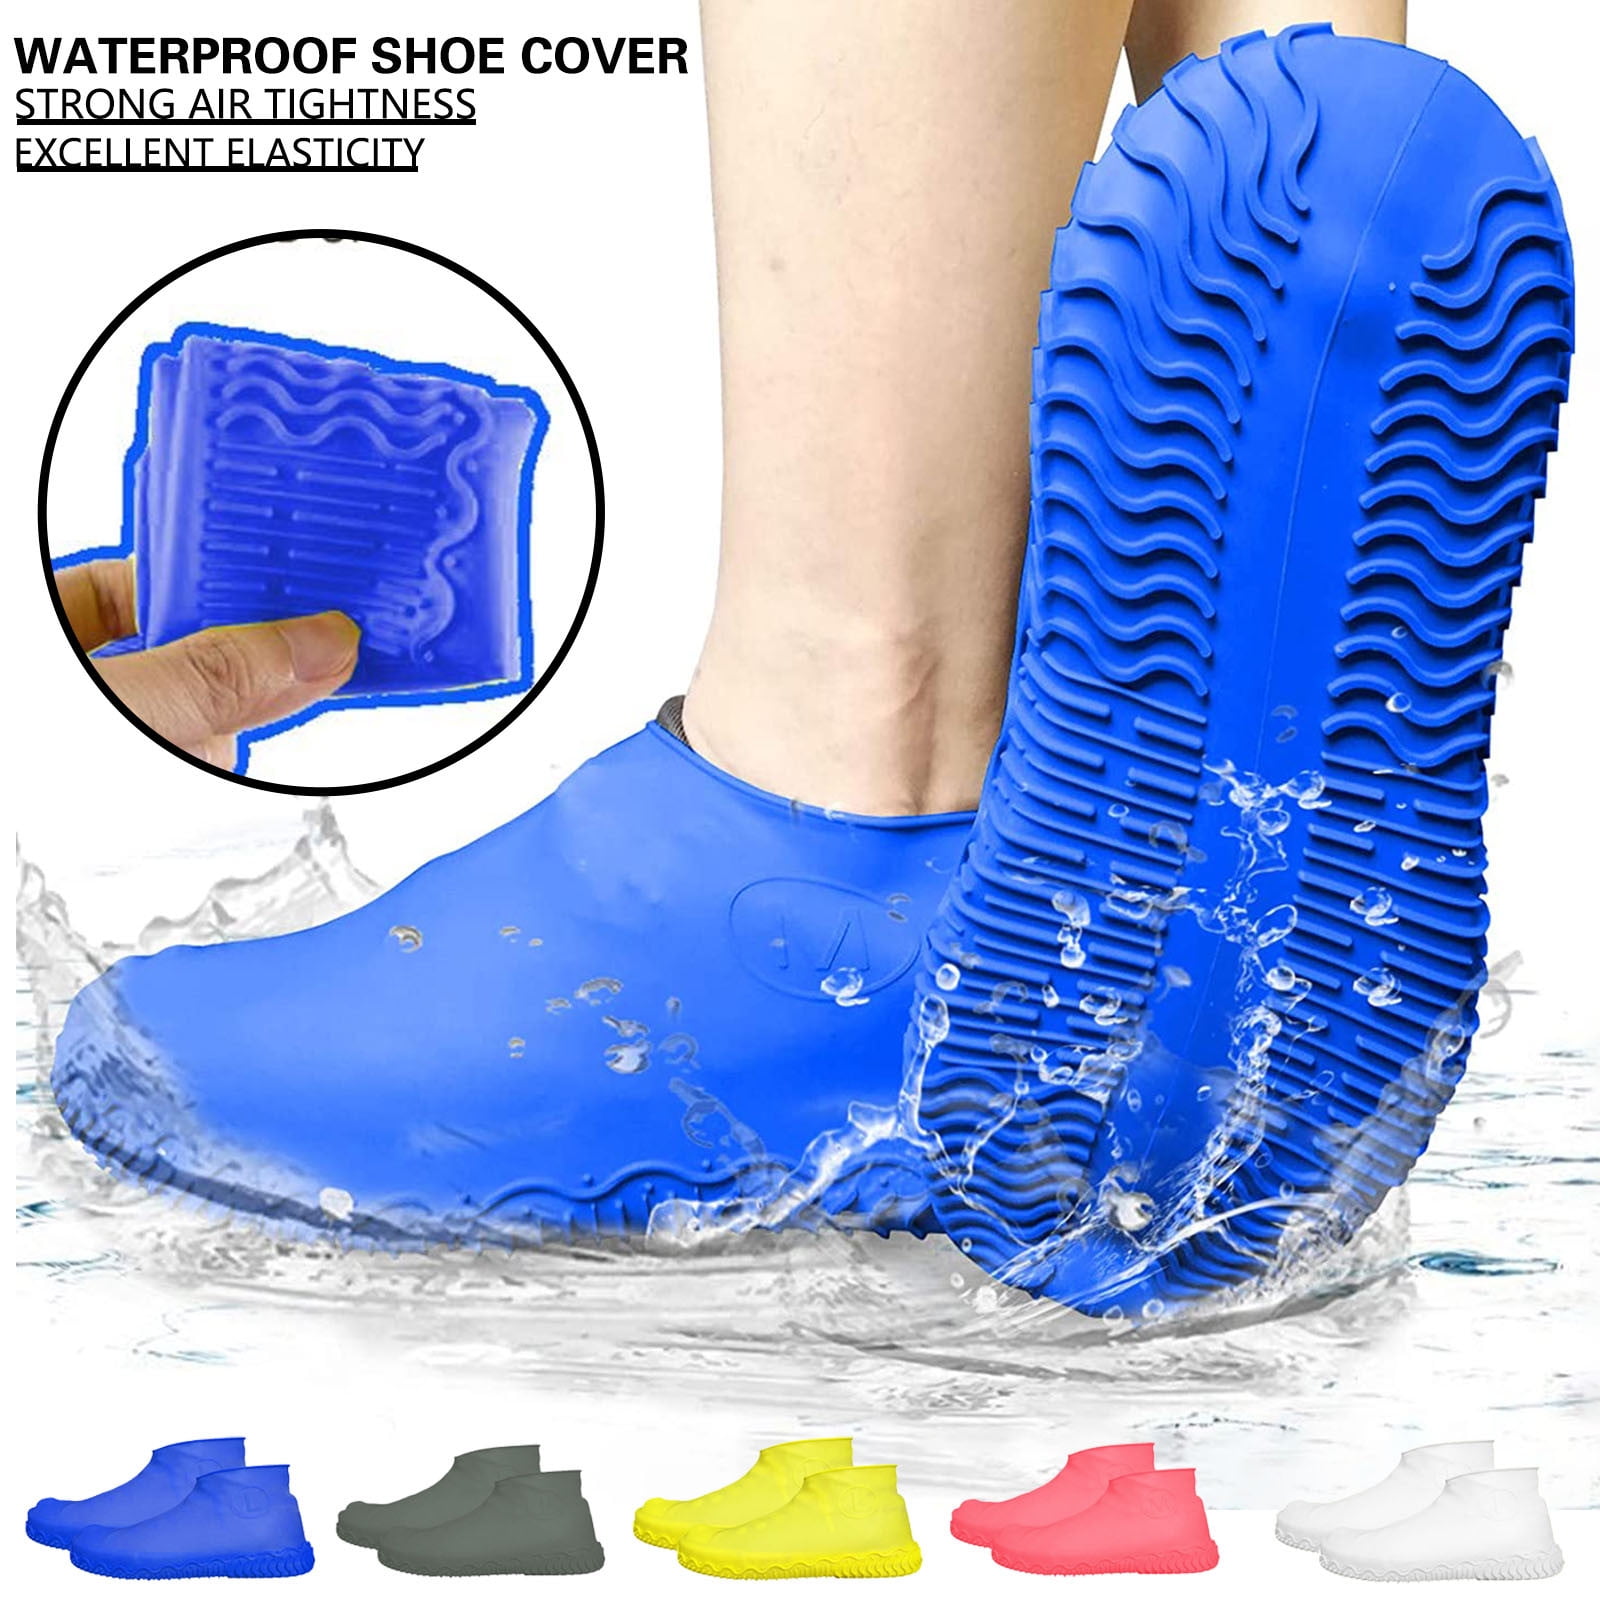 Silicone Reusable Overshoes Waterproof Rain Boots Cover Cycling Shoe Covers Anti Slip Shoe Covers 